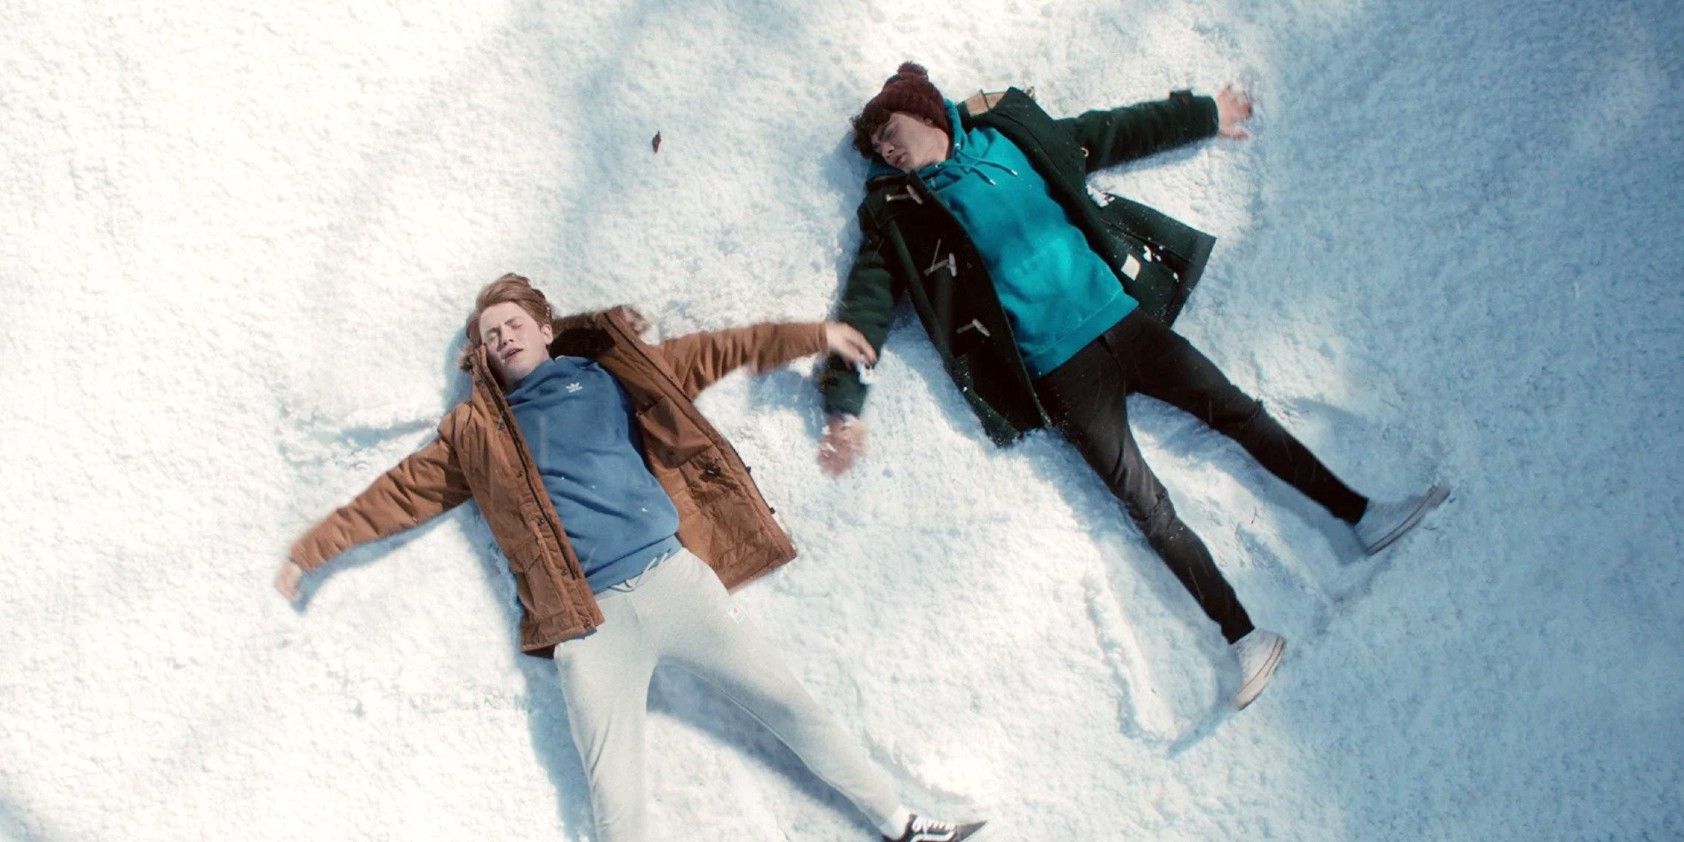 Nick and Charlie doing snow angels